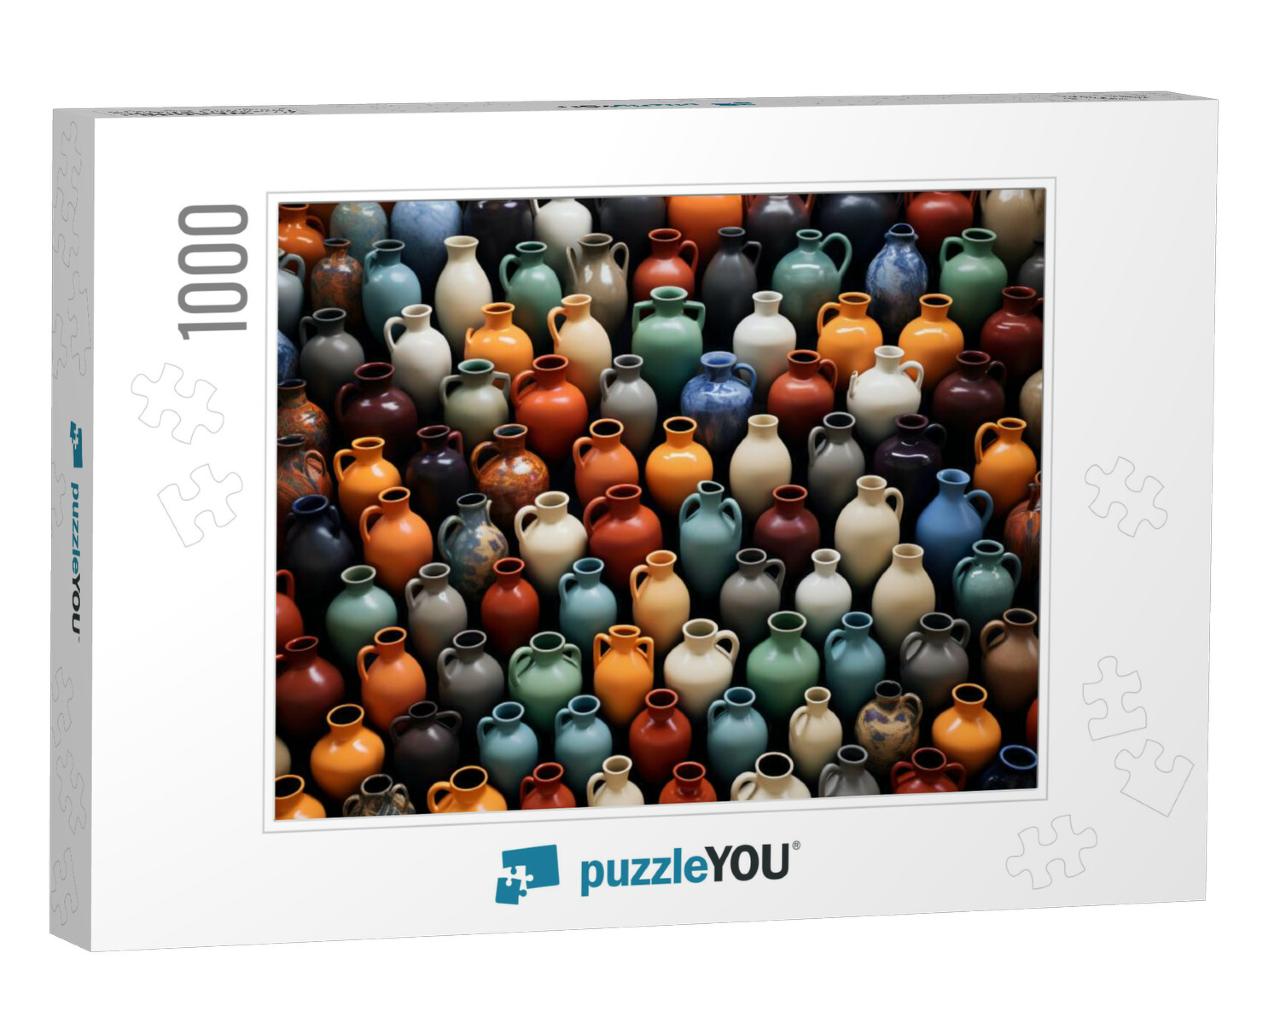 Miniature Vessels Jigsaw Puzzle with 1000 pieces